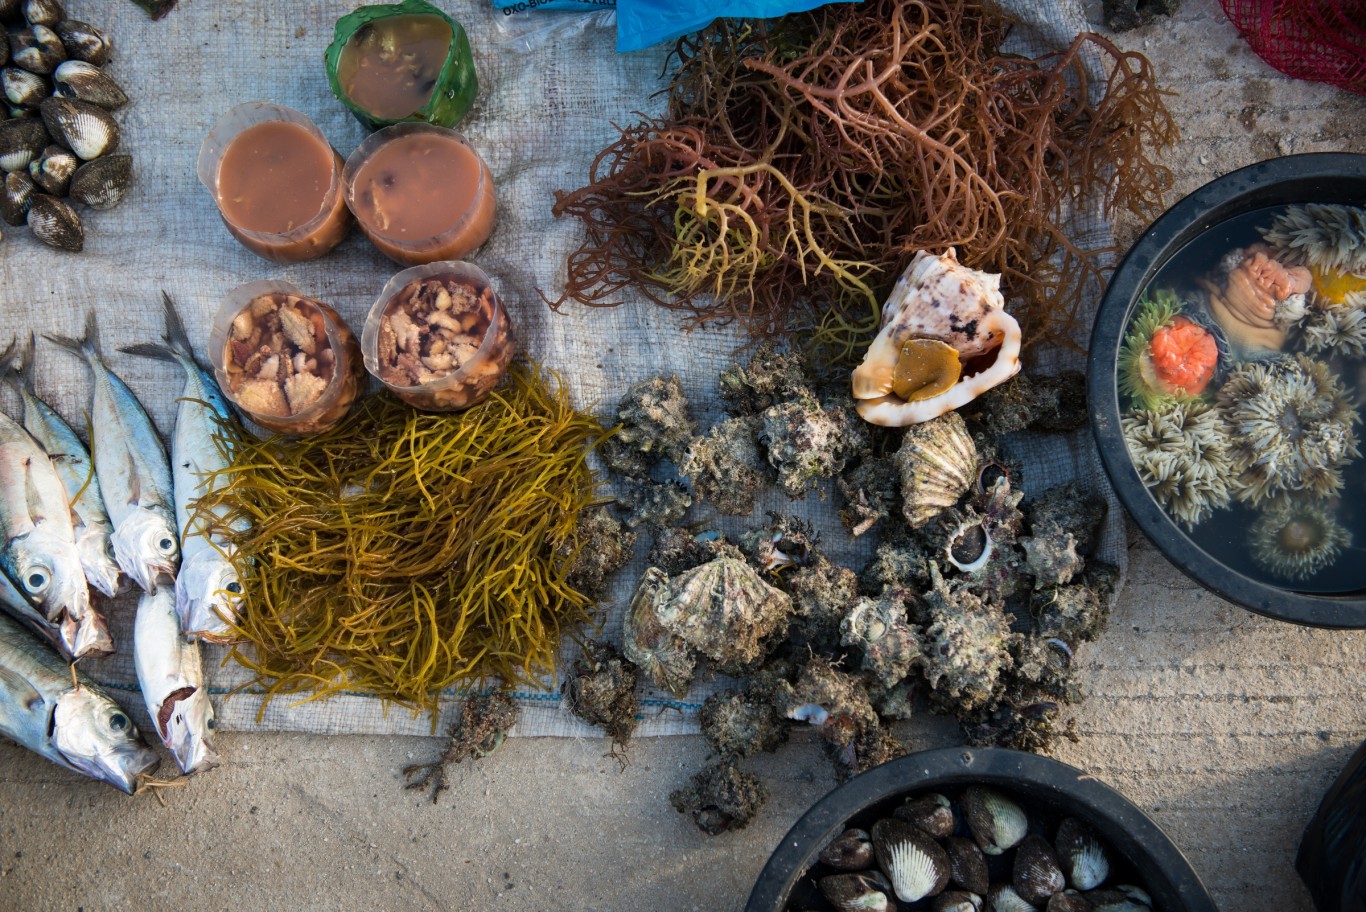 Local market. Everything from fresh shells, seaweed, fish, and urchins can be found here.